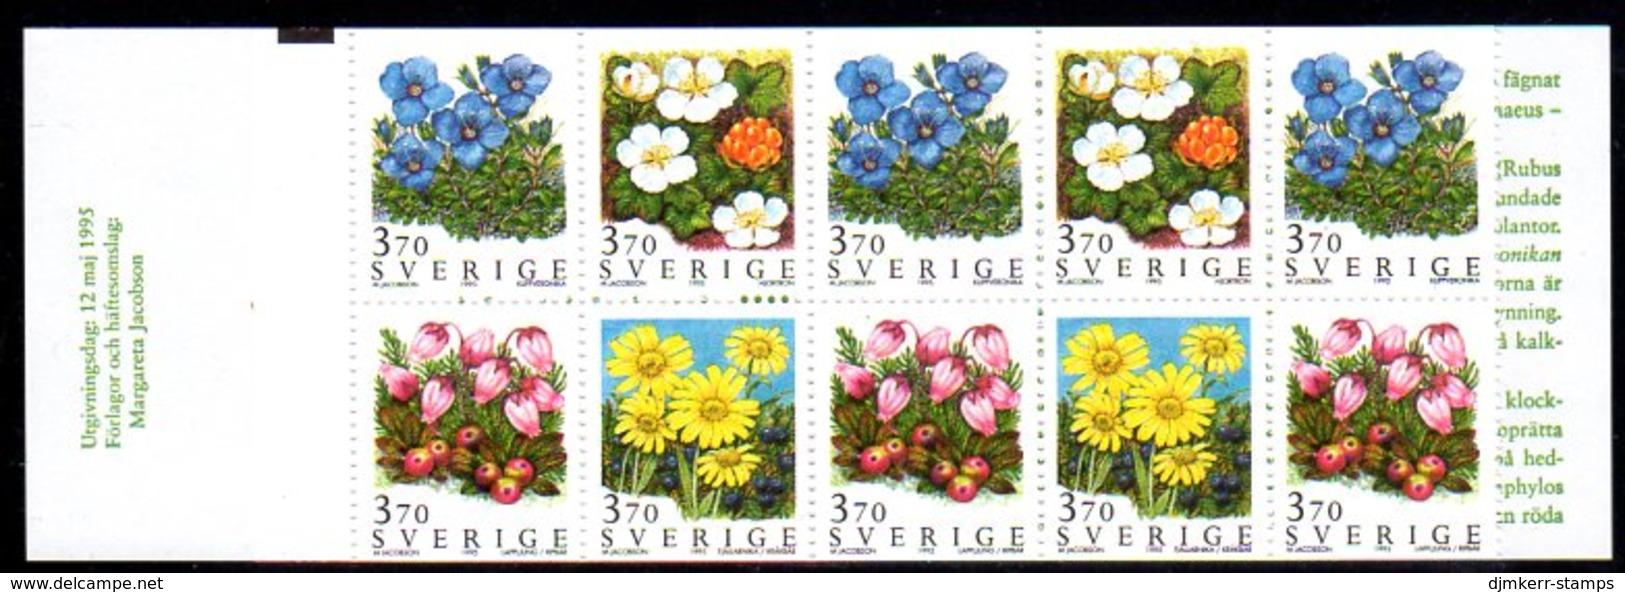 SWEDEN 1995 Mountain Flowers Booklet MNH / **.  Michel MH203 - 1981-..